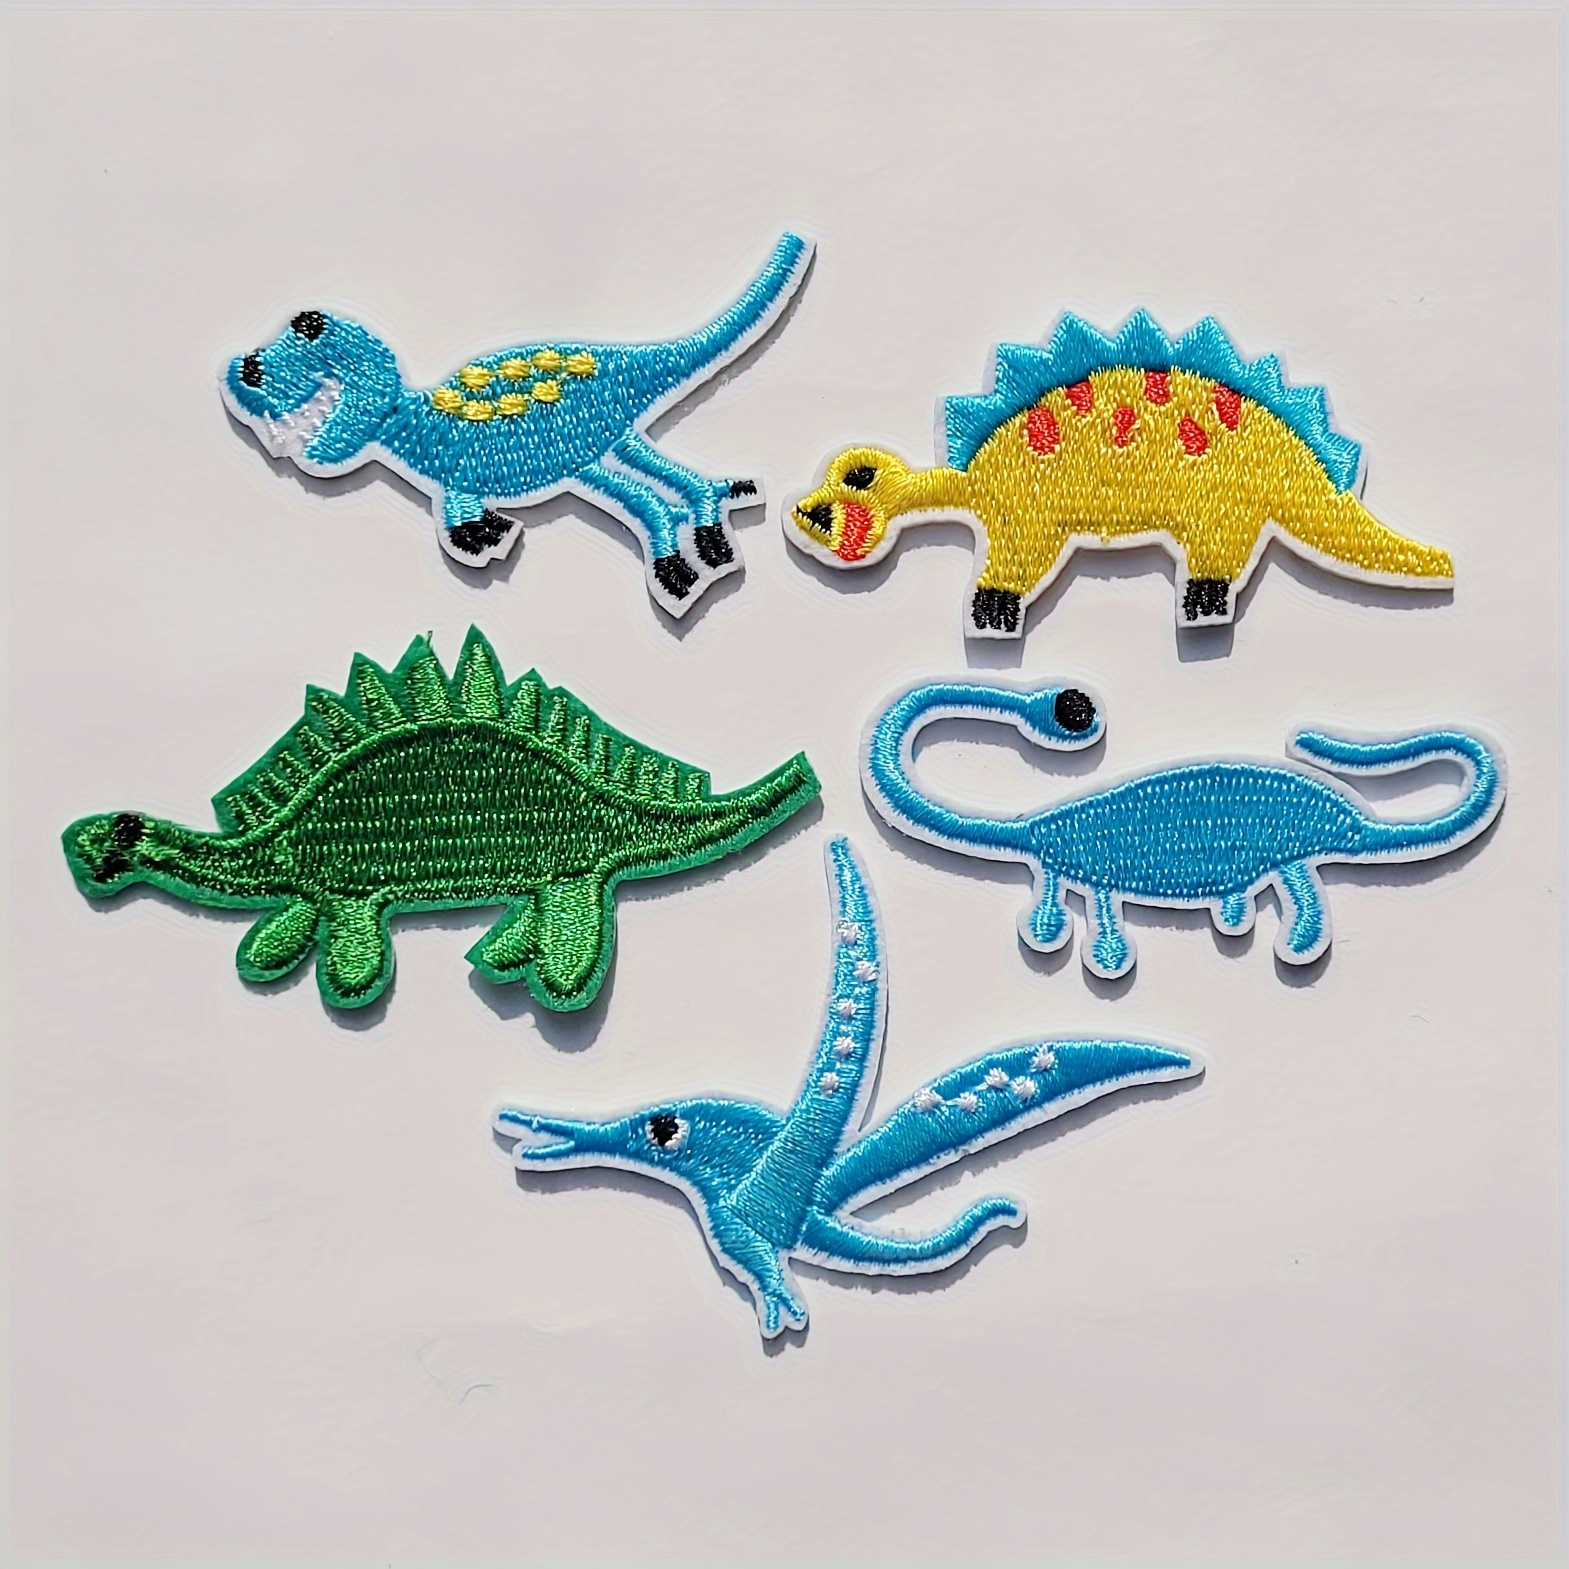 Dinosaur Embroidered Patches, Cute Dinosaur Theme Iron on Patches for Clothes 11pcs Sew on Applique Embroidered Patches for Kids DIY Accessories for